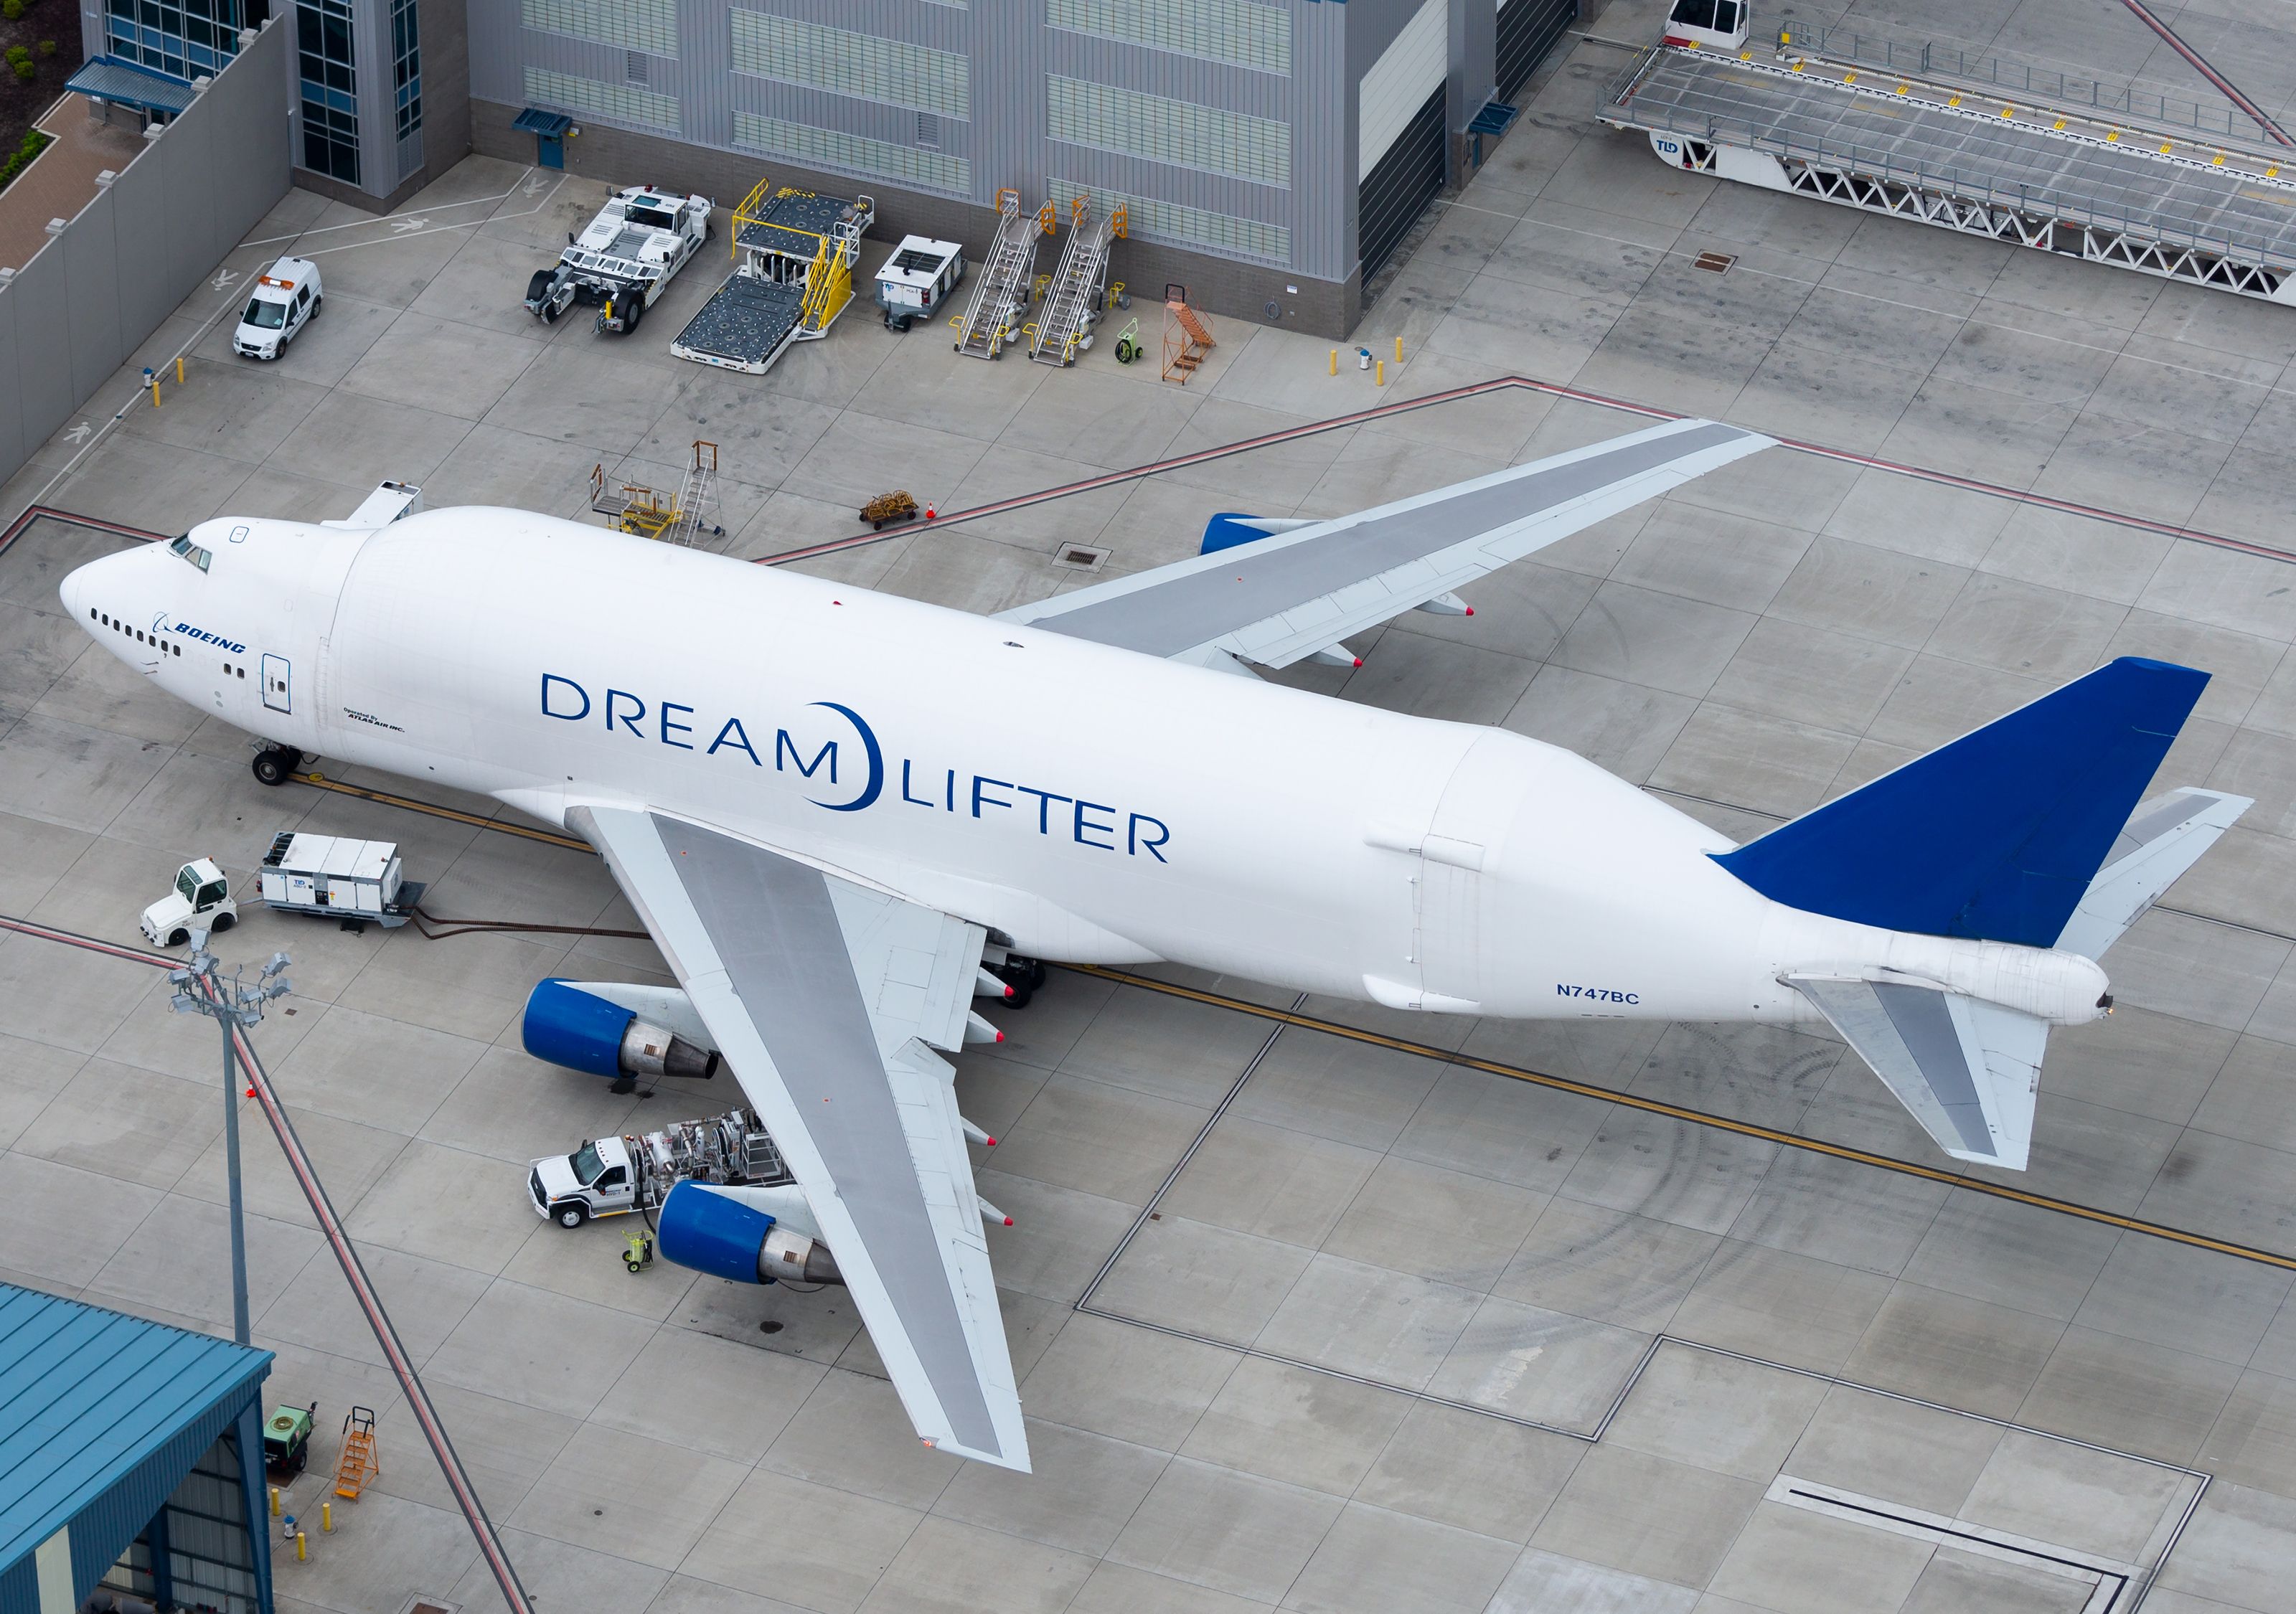 A Boeing Dreamlifter parked at an airport.